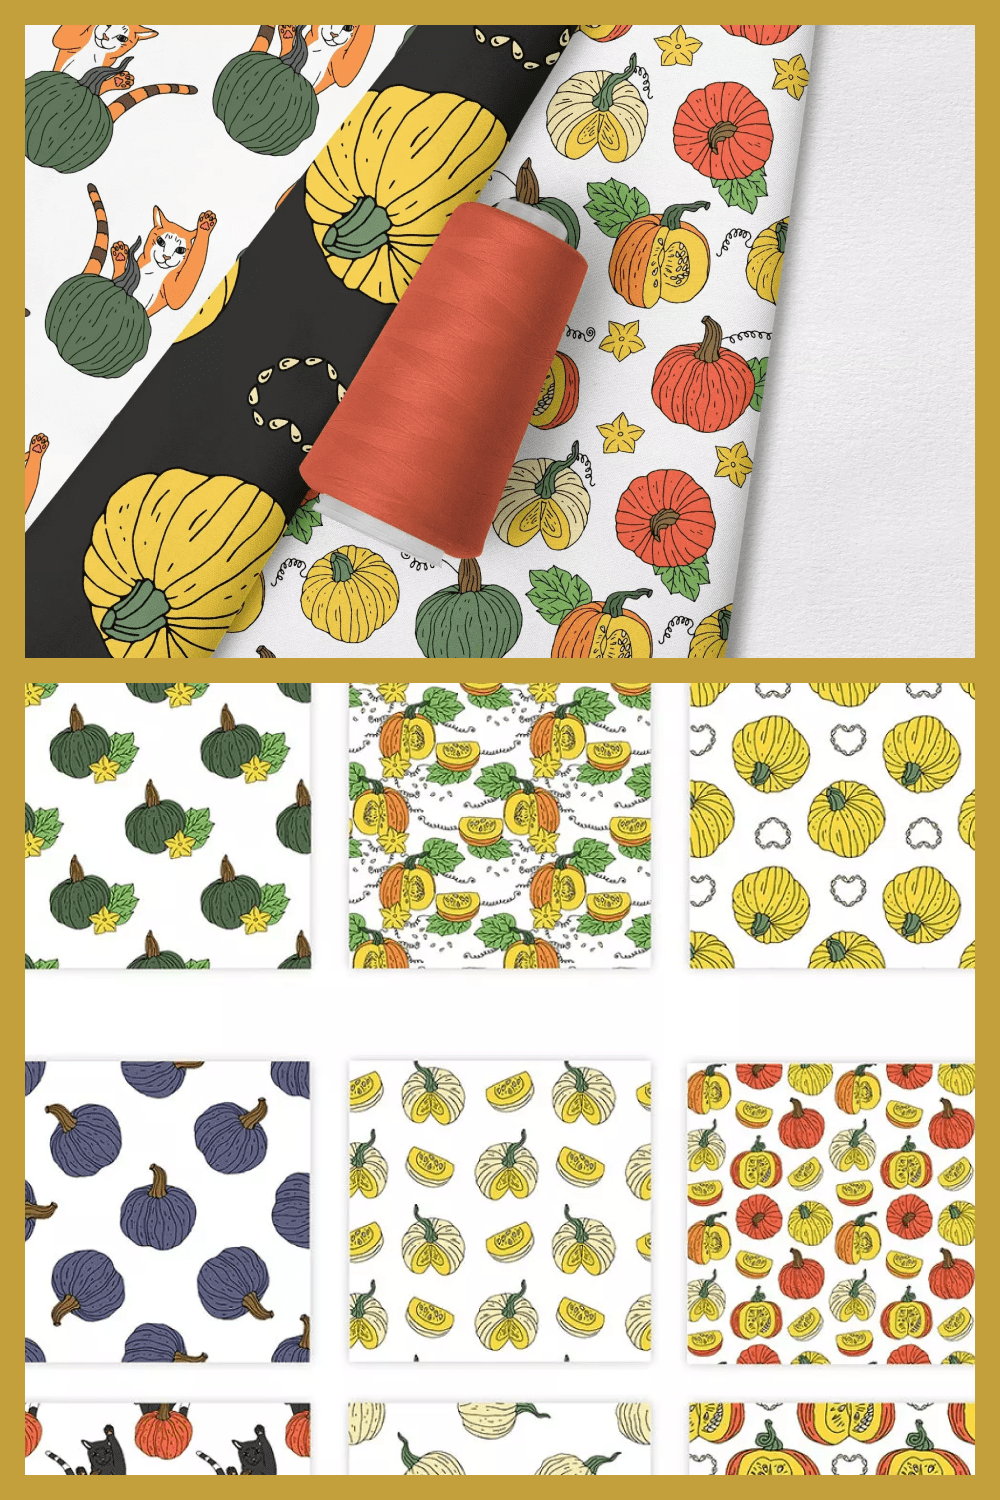 Collage with images of drawn pumpkins.